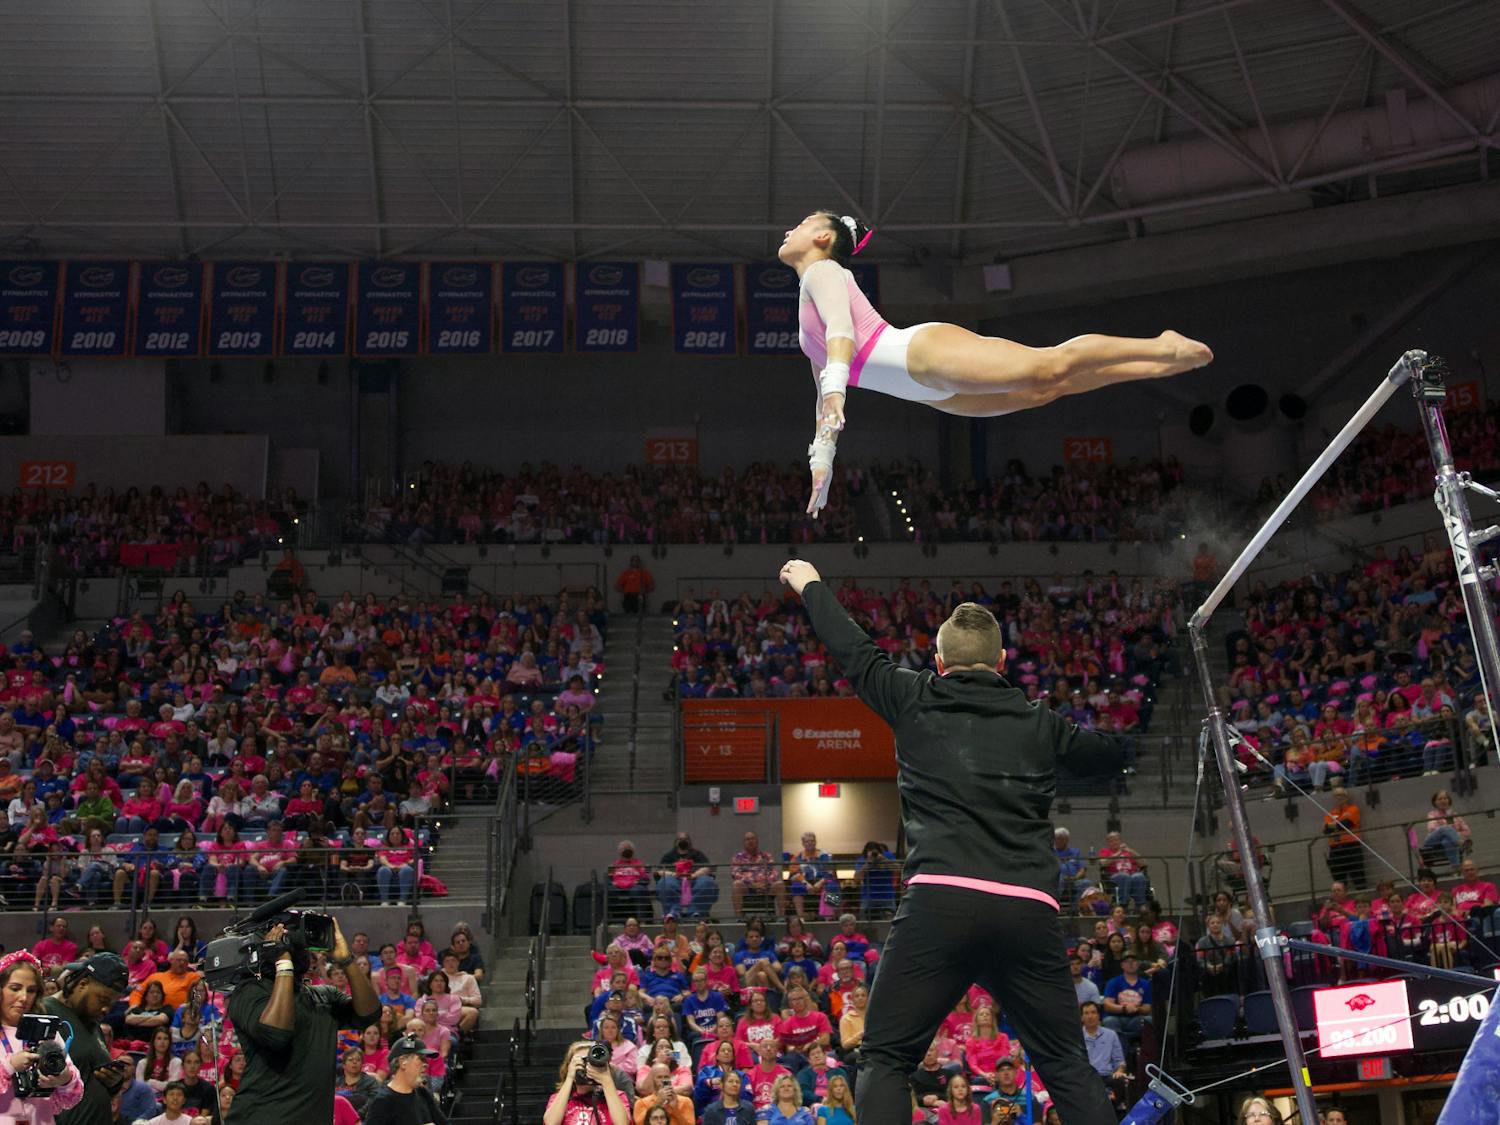 Junior Leanne Wong competes in her uneven bars routine in the Gators gymnastics Annual Link to Pink meet on Friday, February 9, 2023.